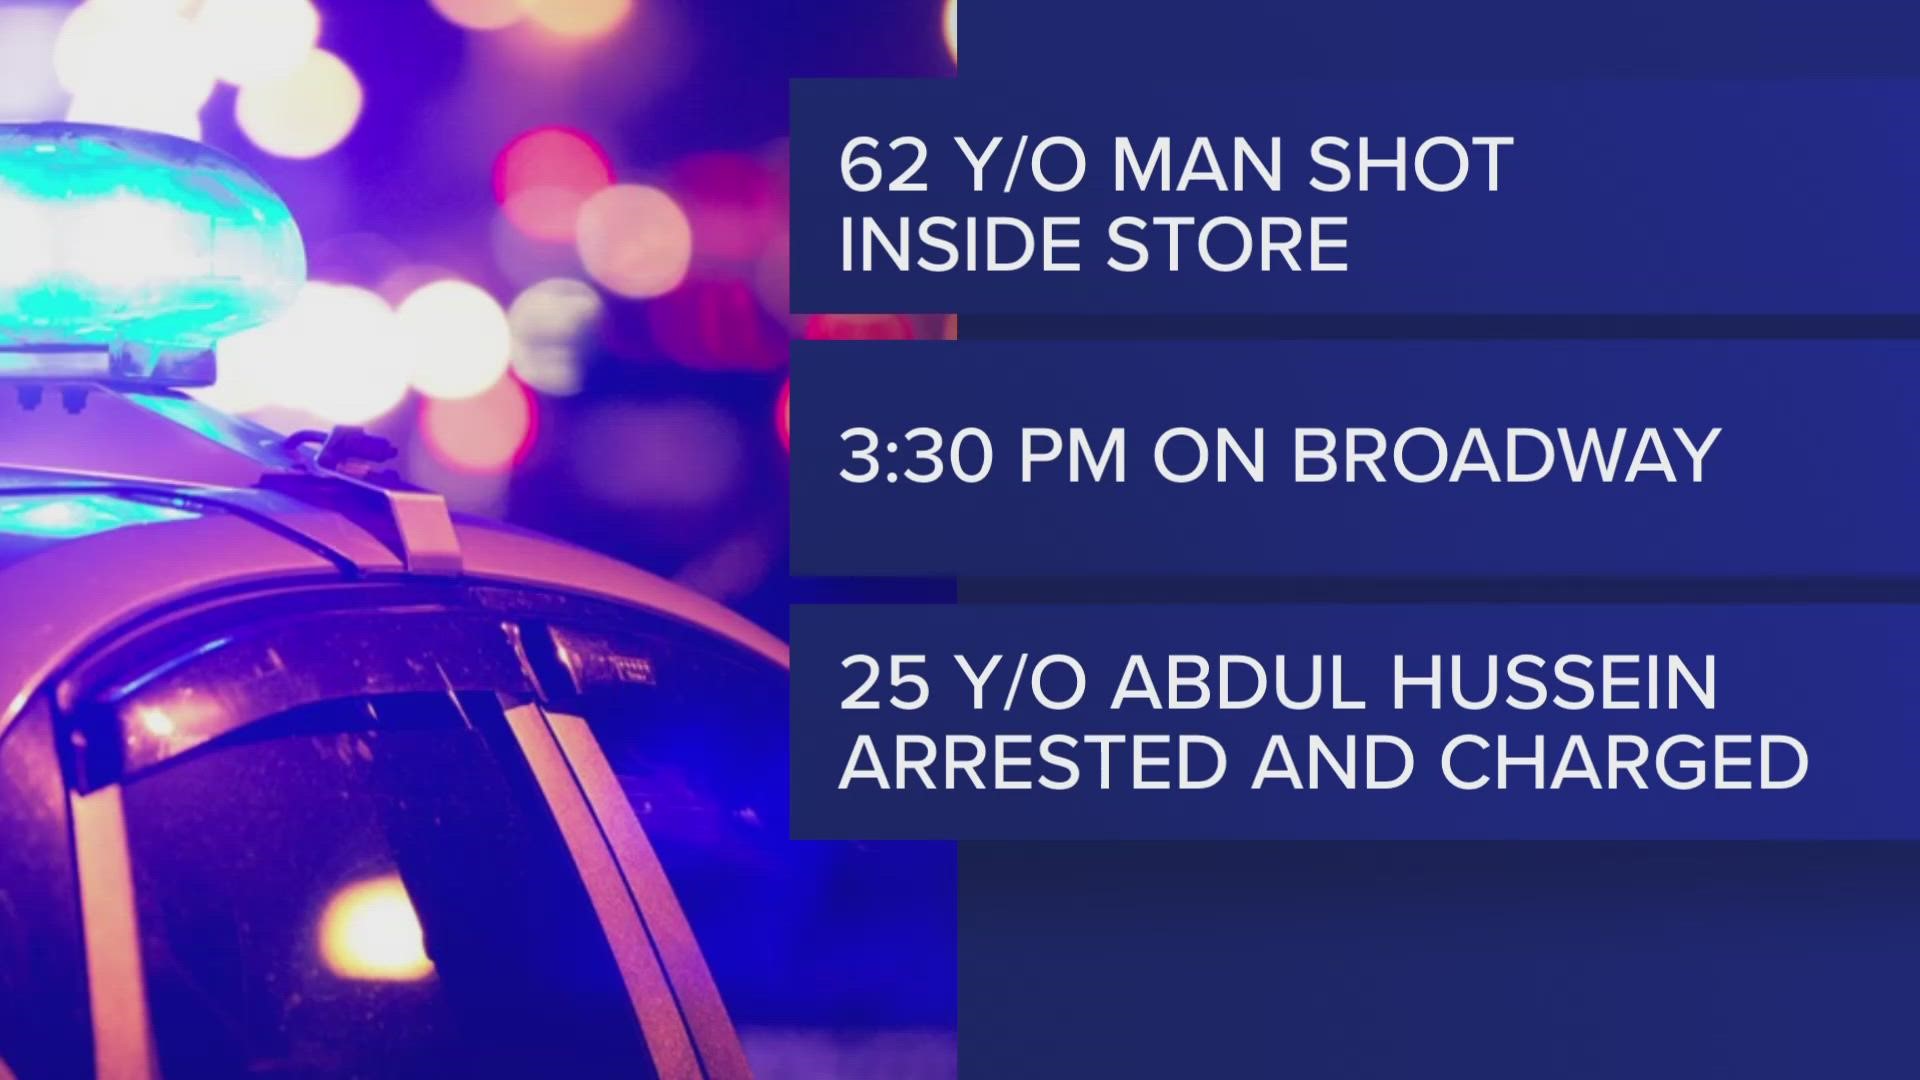 A BUFFALO MAN IS DEAD... AFTER A SHOOTING INSIDE OF A STORE ON BROADWAY.